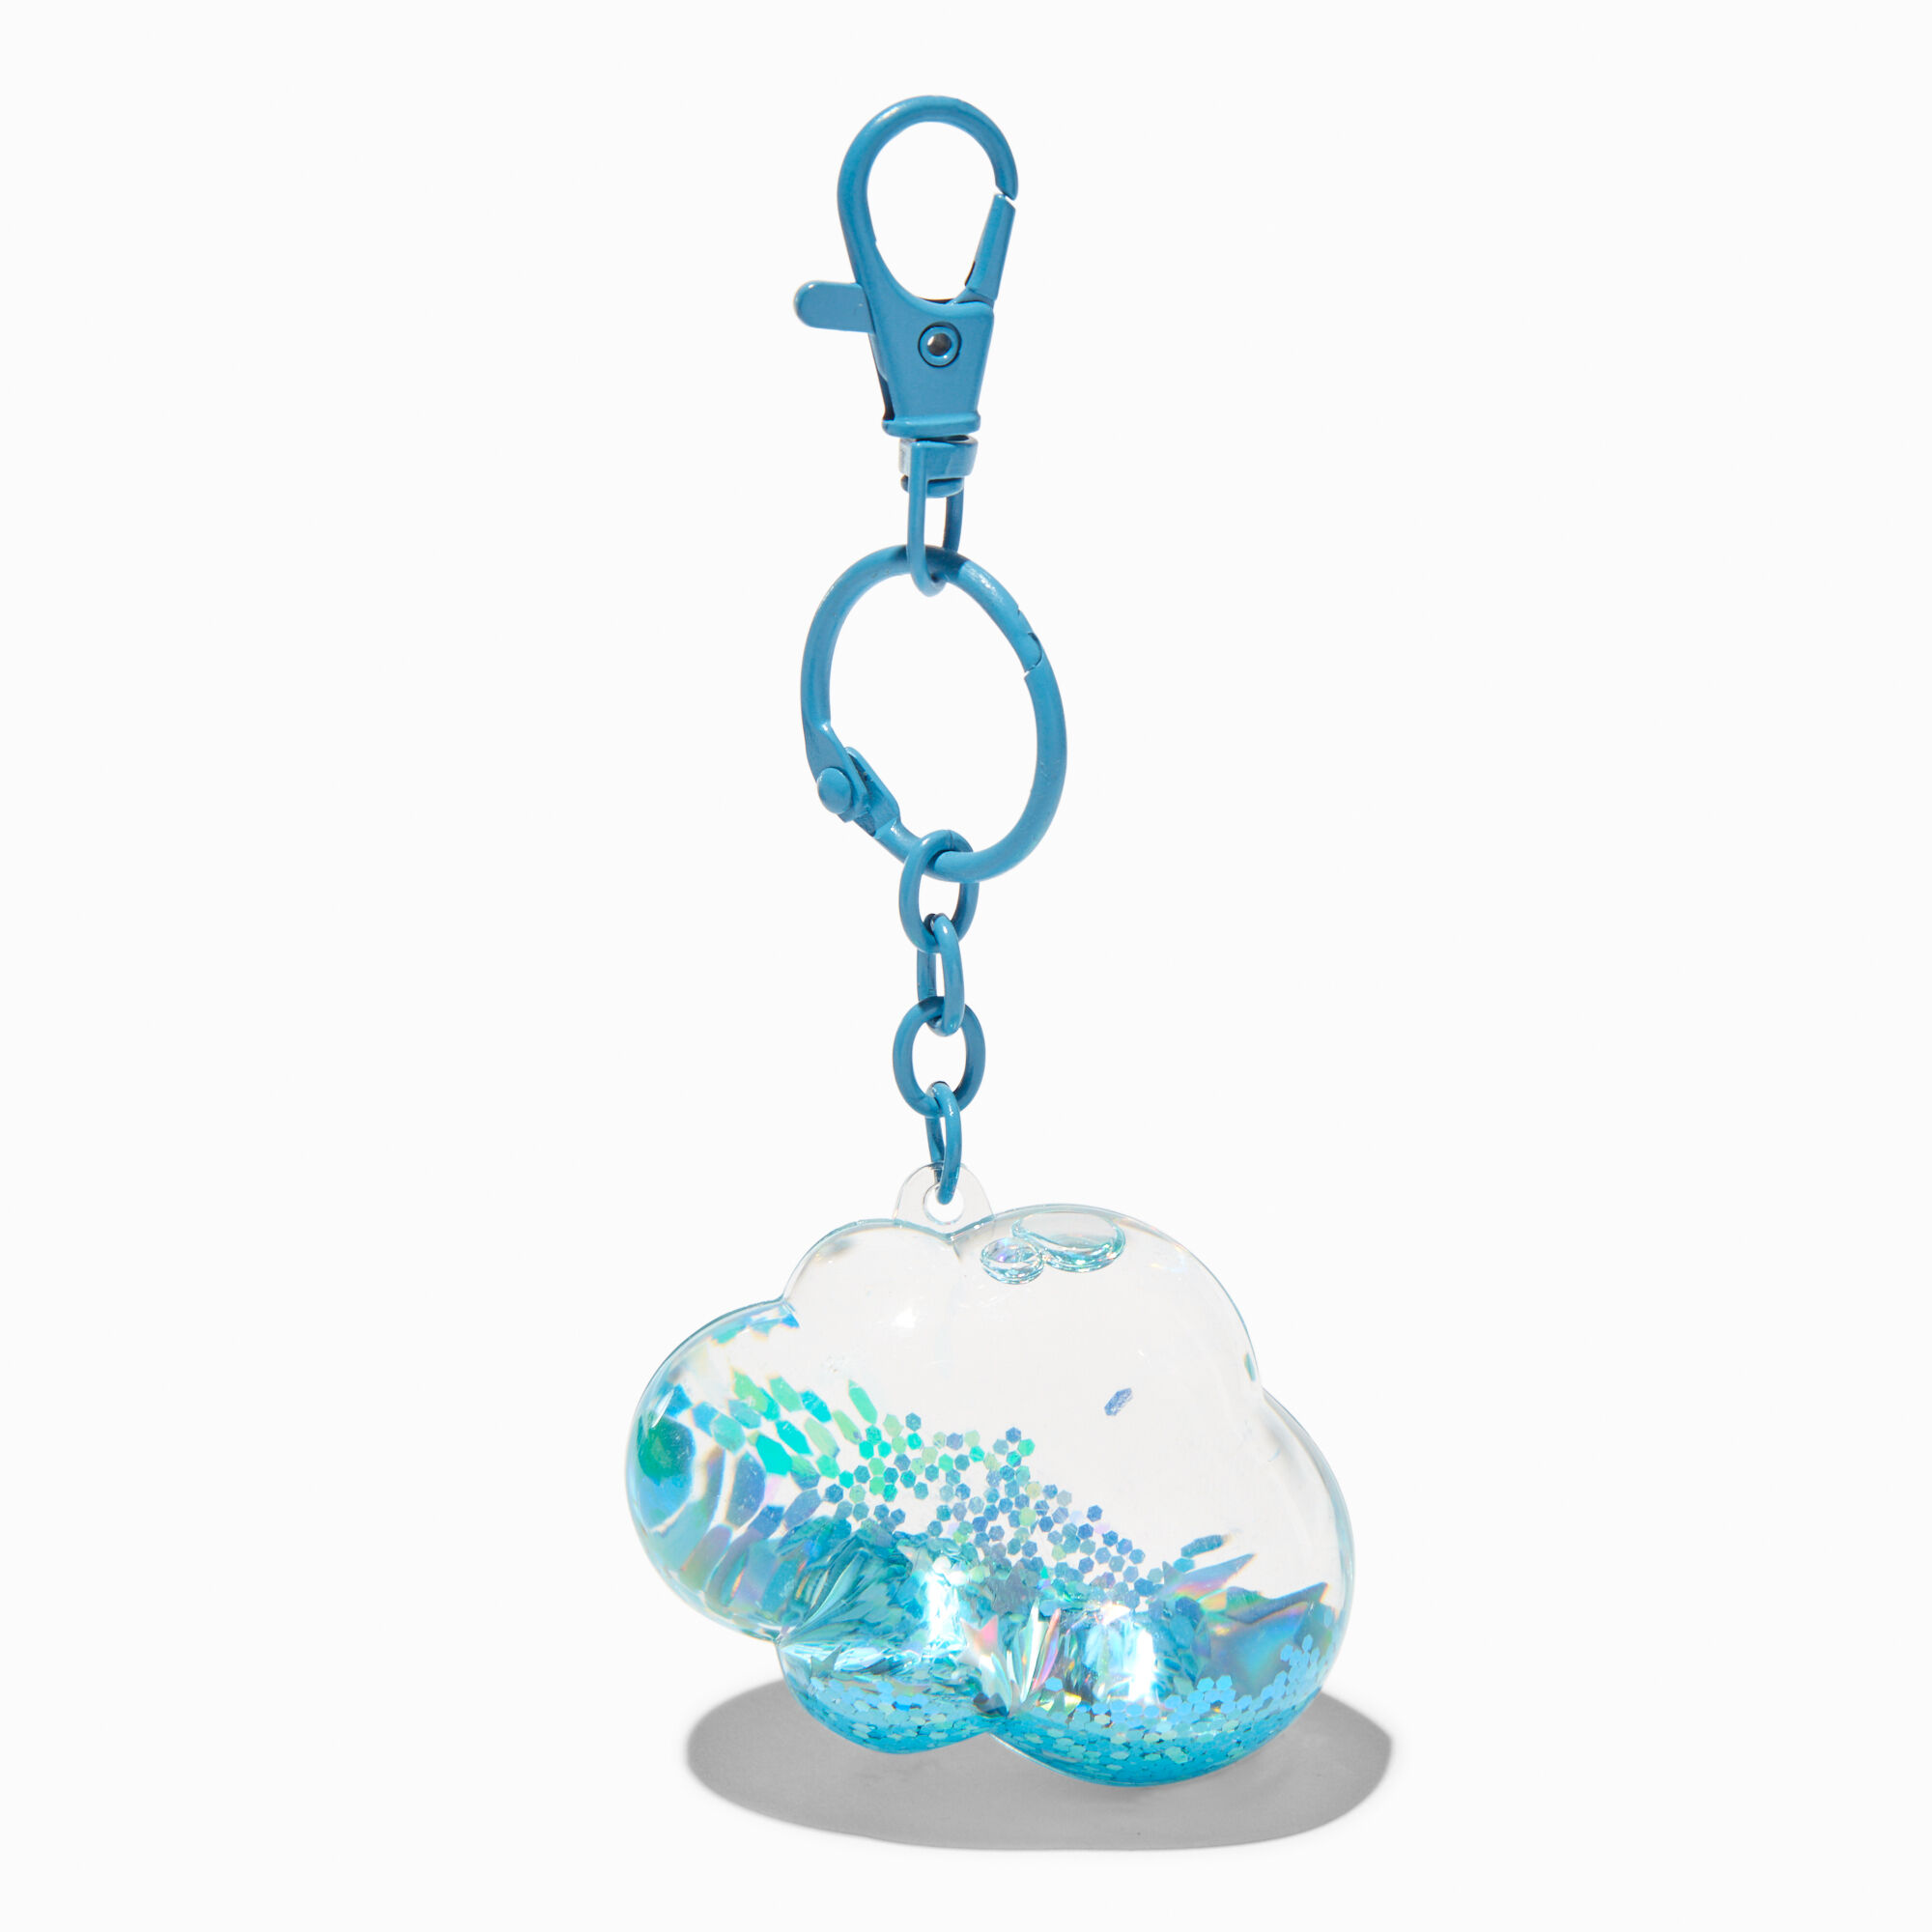 View Claires Cloud WaterFilled Keyring information